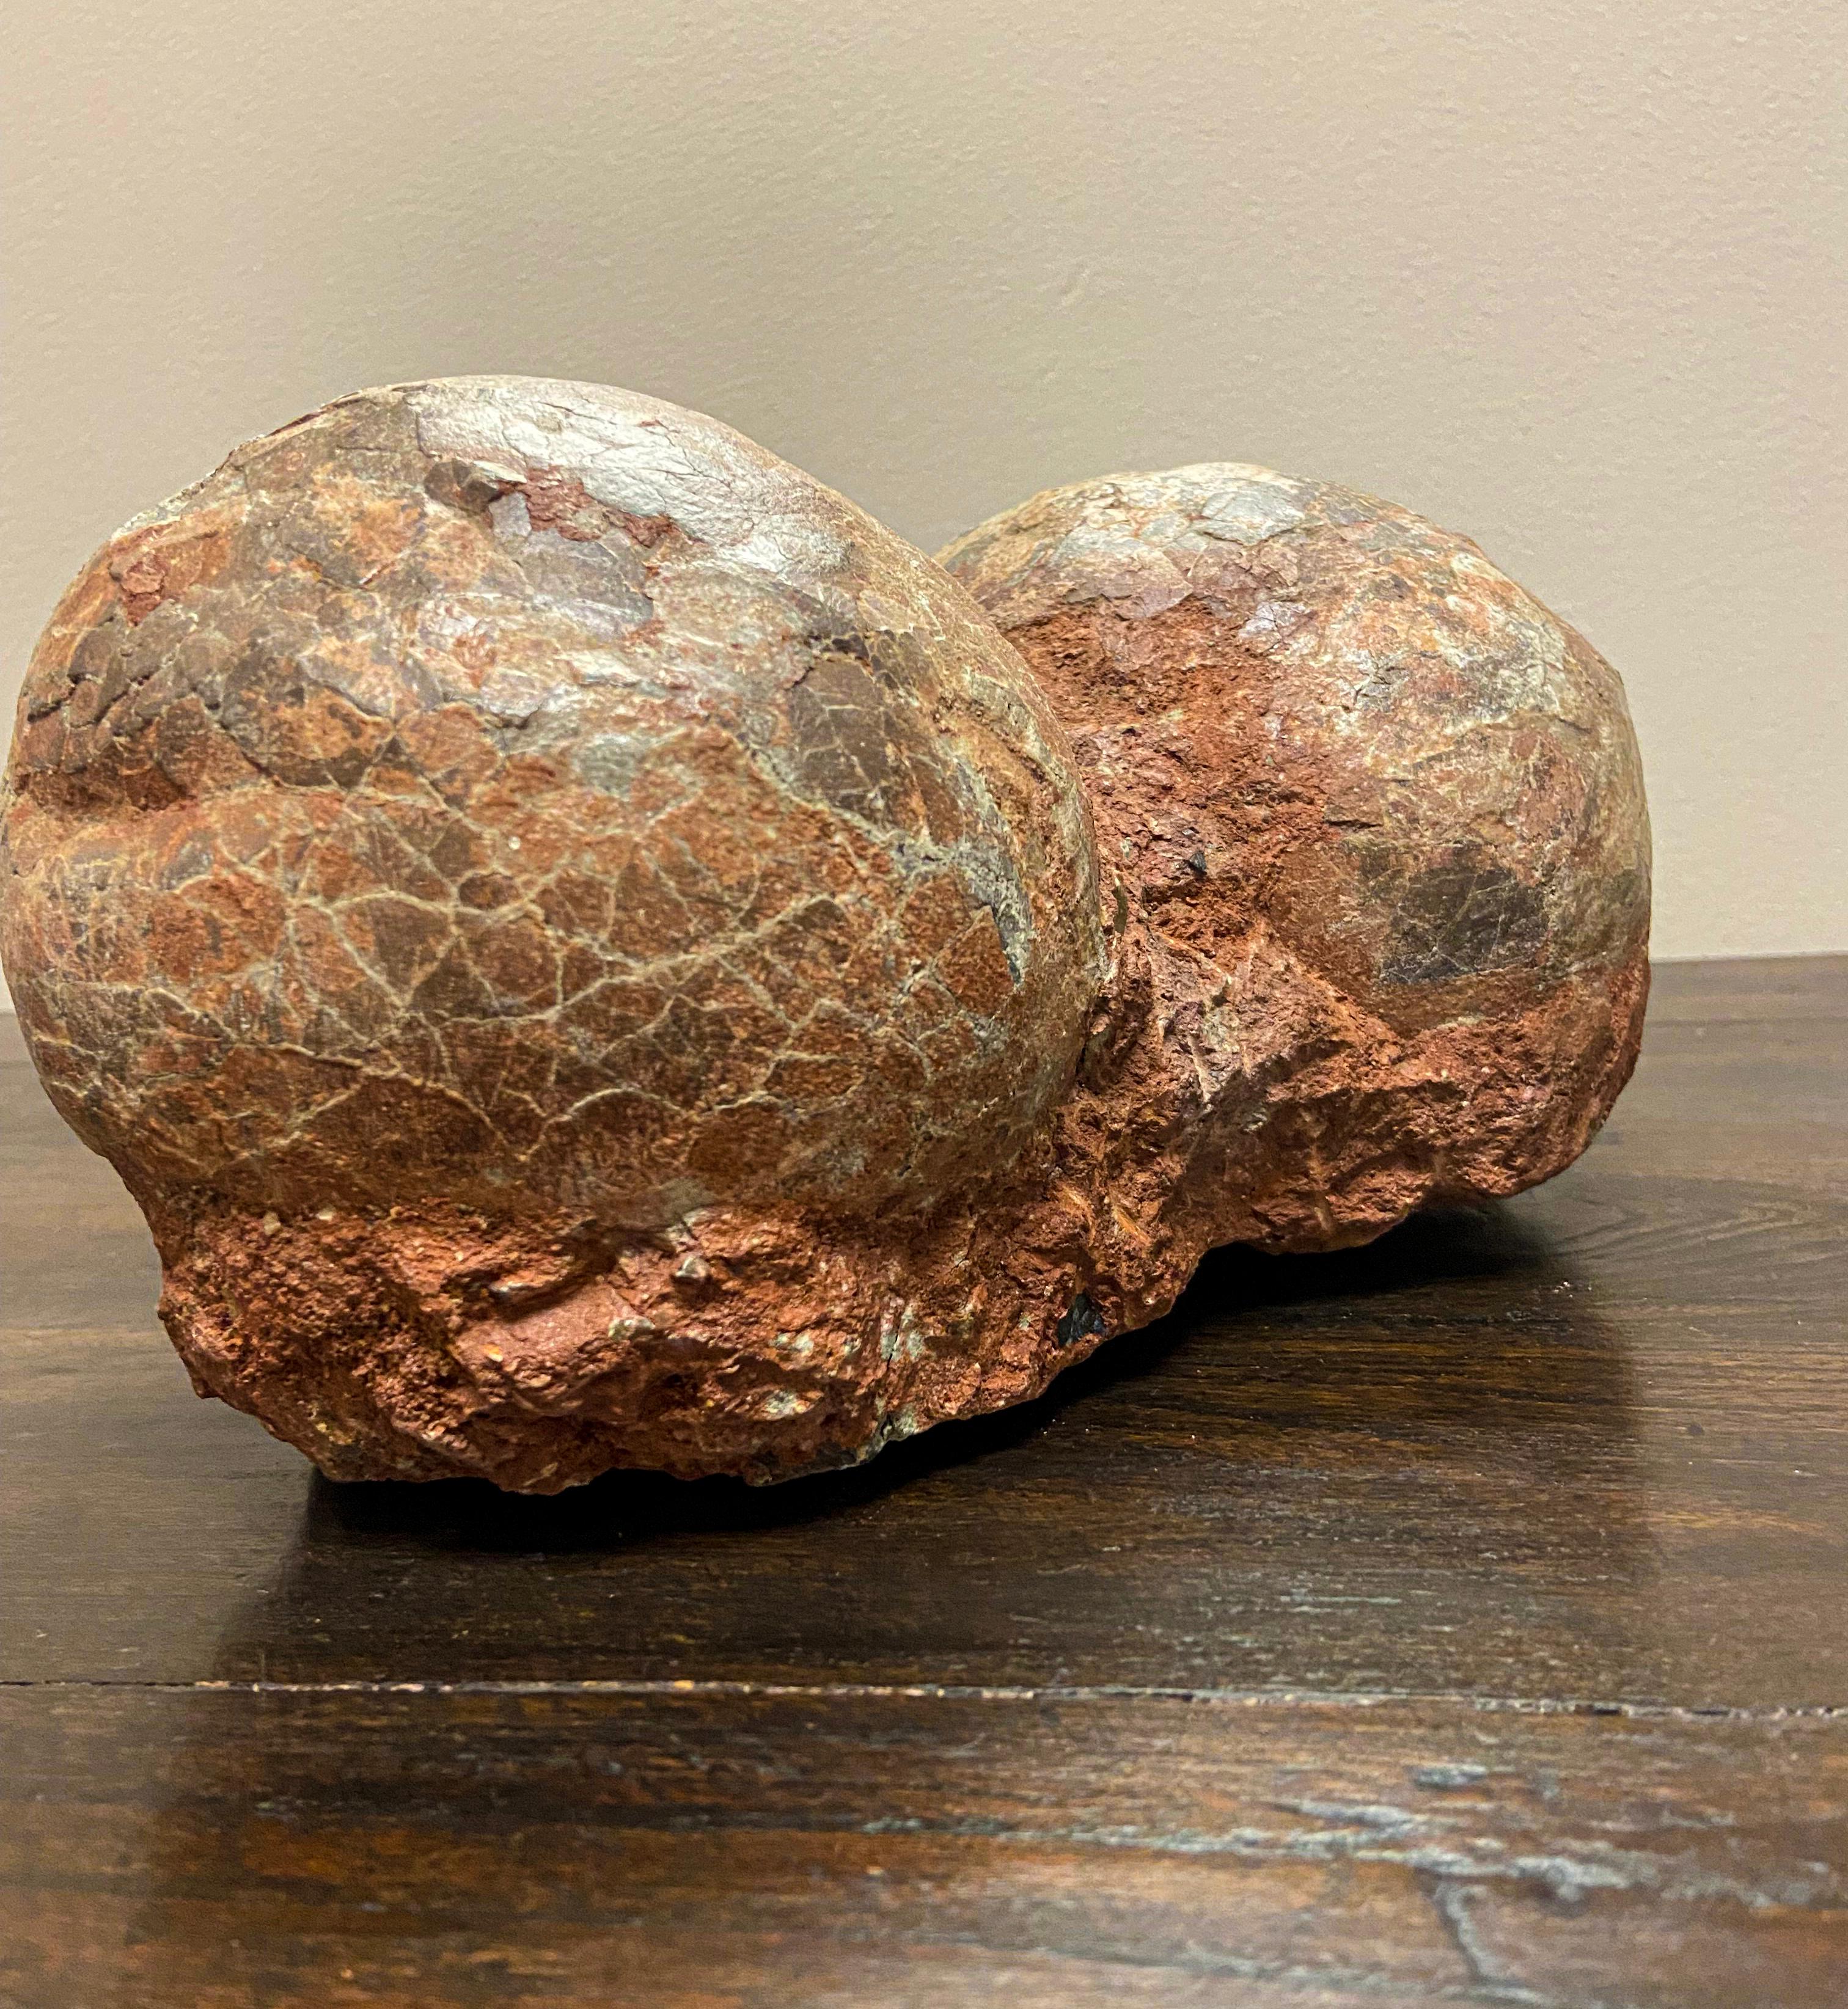 Unknown Rare Prehistoric Petrified Dinosaur Egg Nest with Cracked Surface